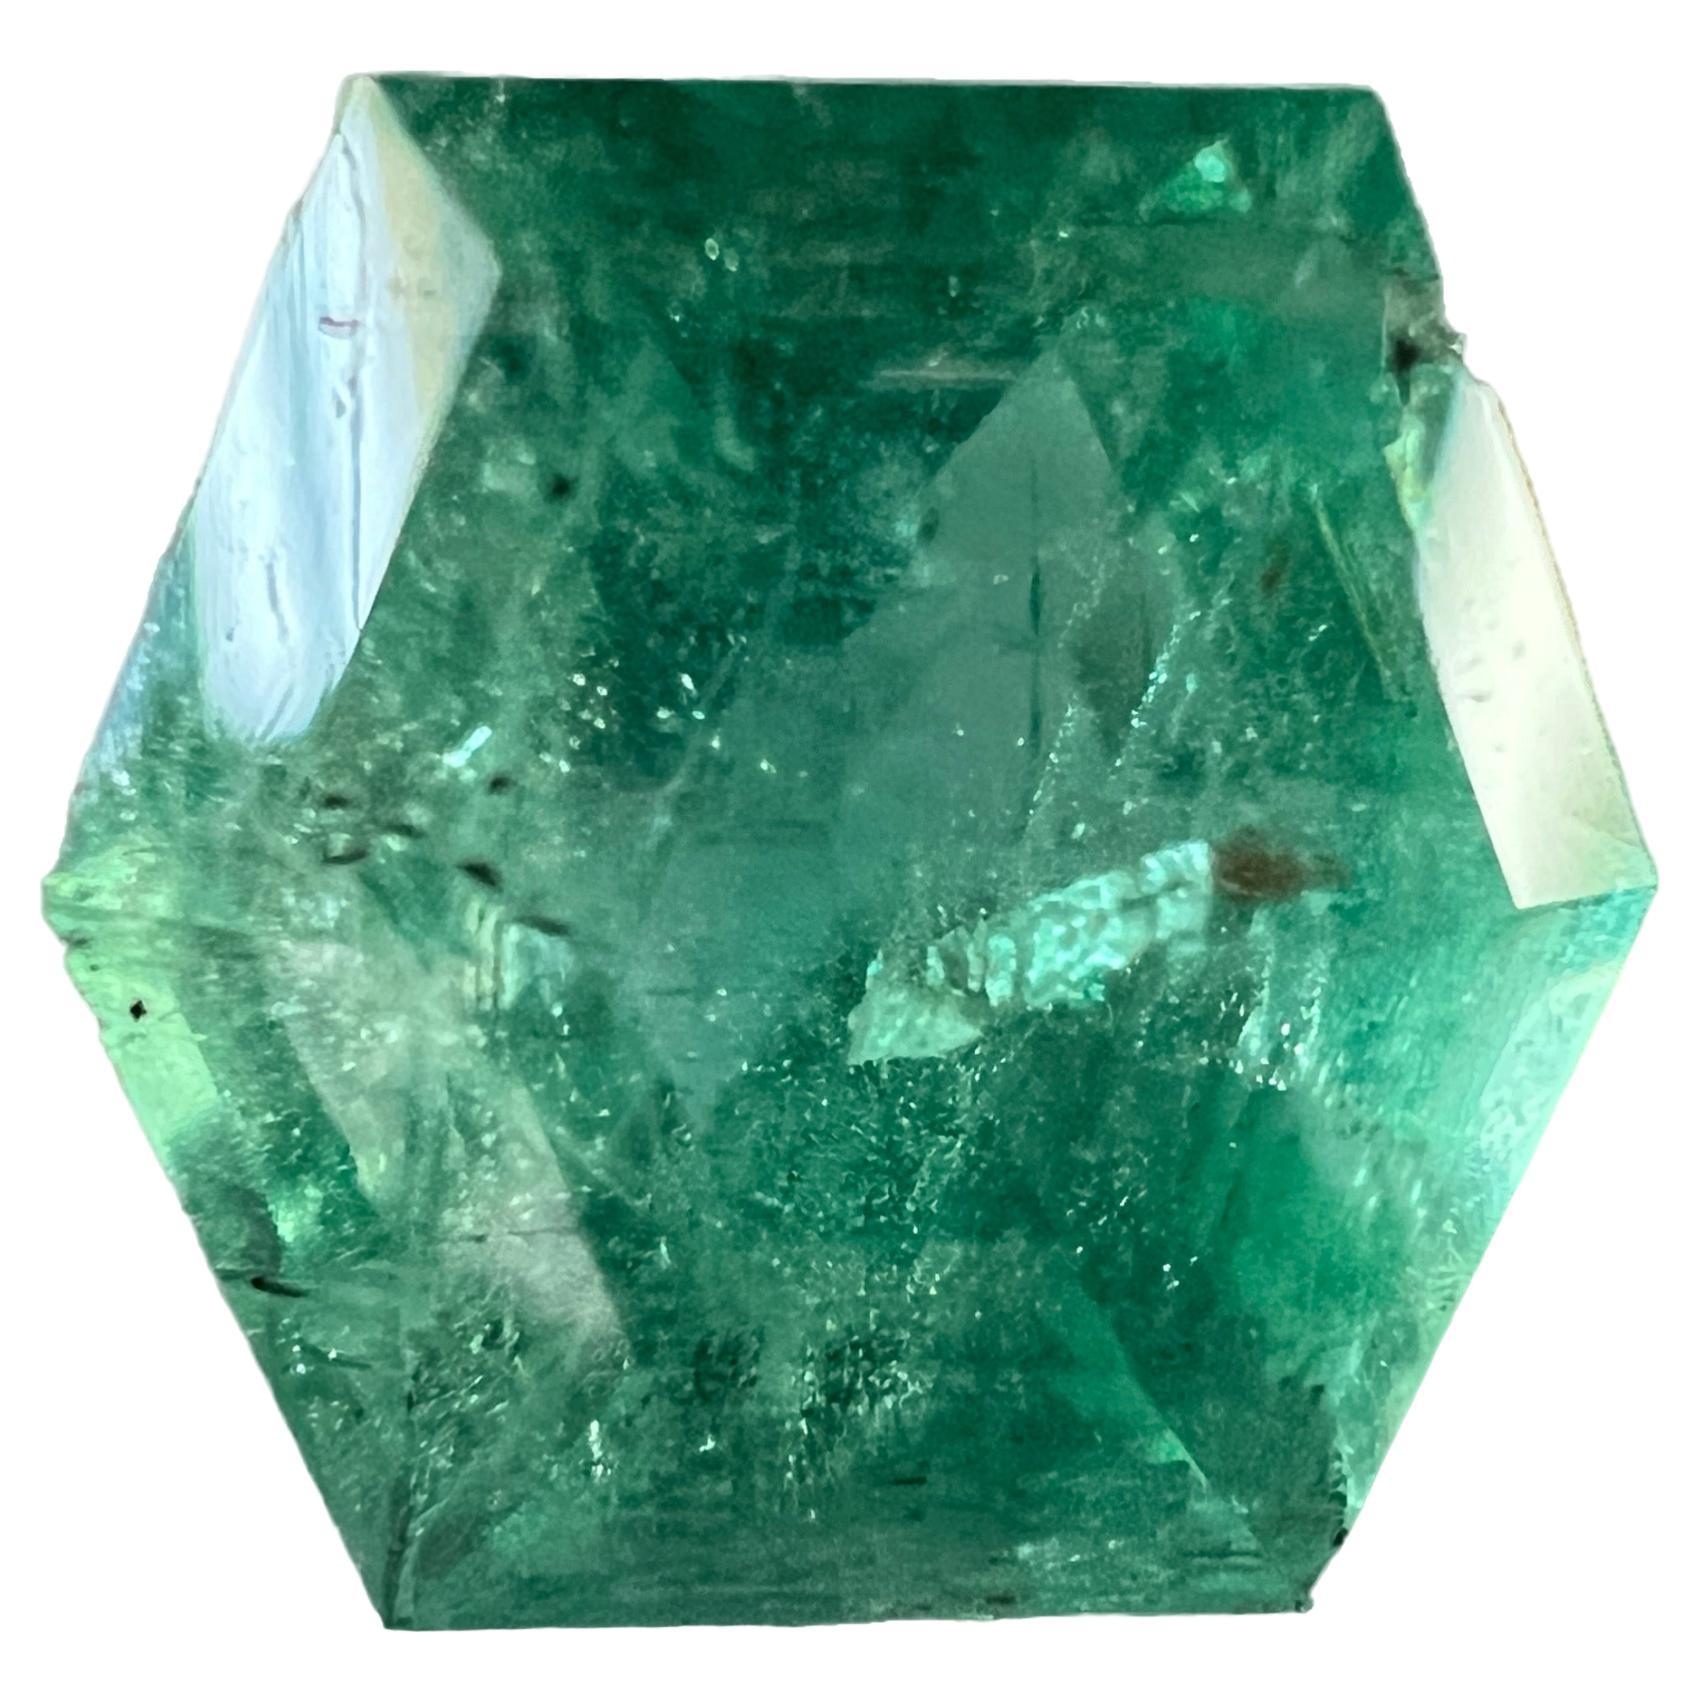 Artisan NO RESERVE 4.56ct Octagonal Cut NO OIL Untreated Natural EMERALD Gemstone For Sale